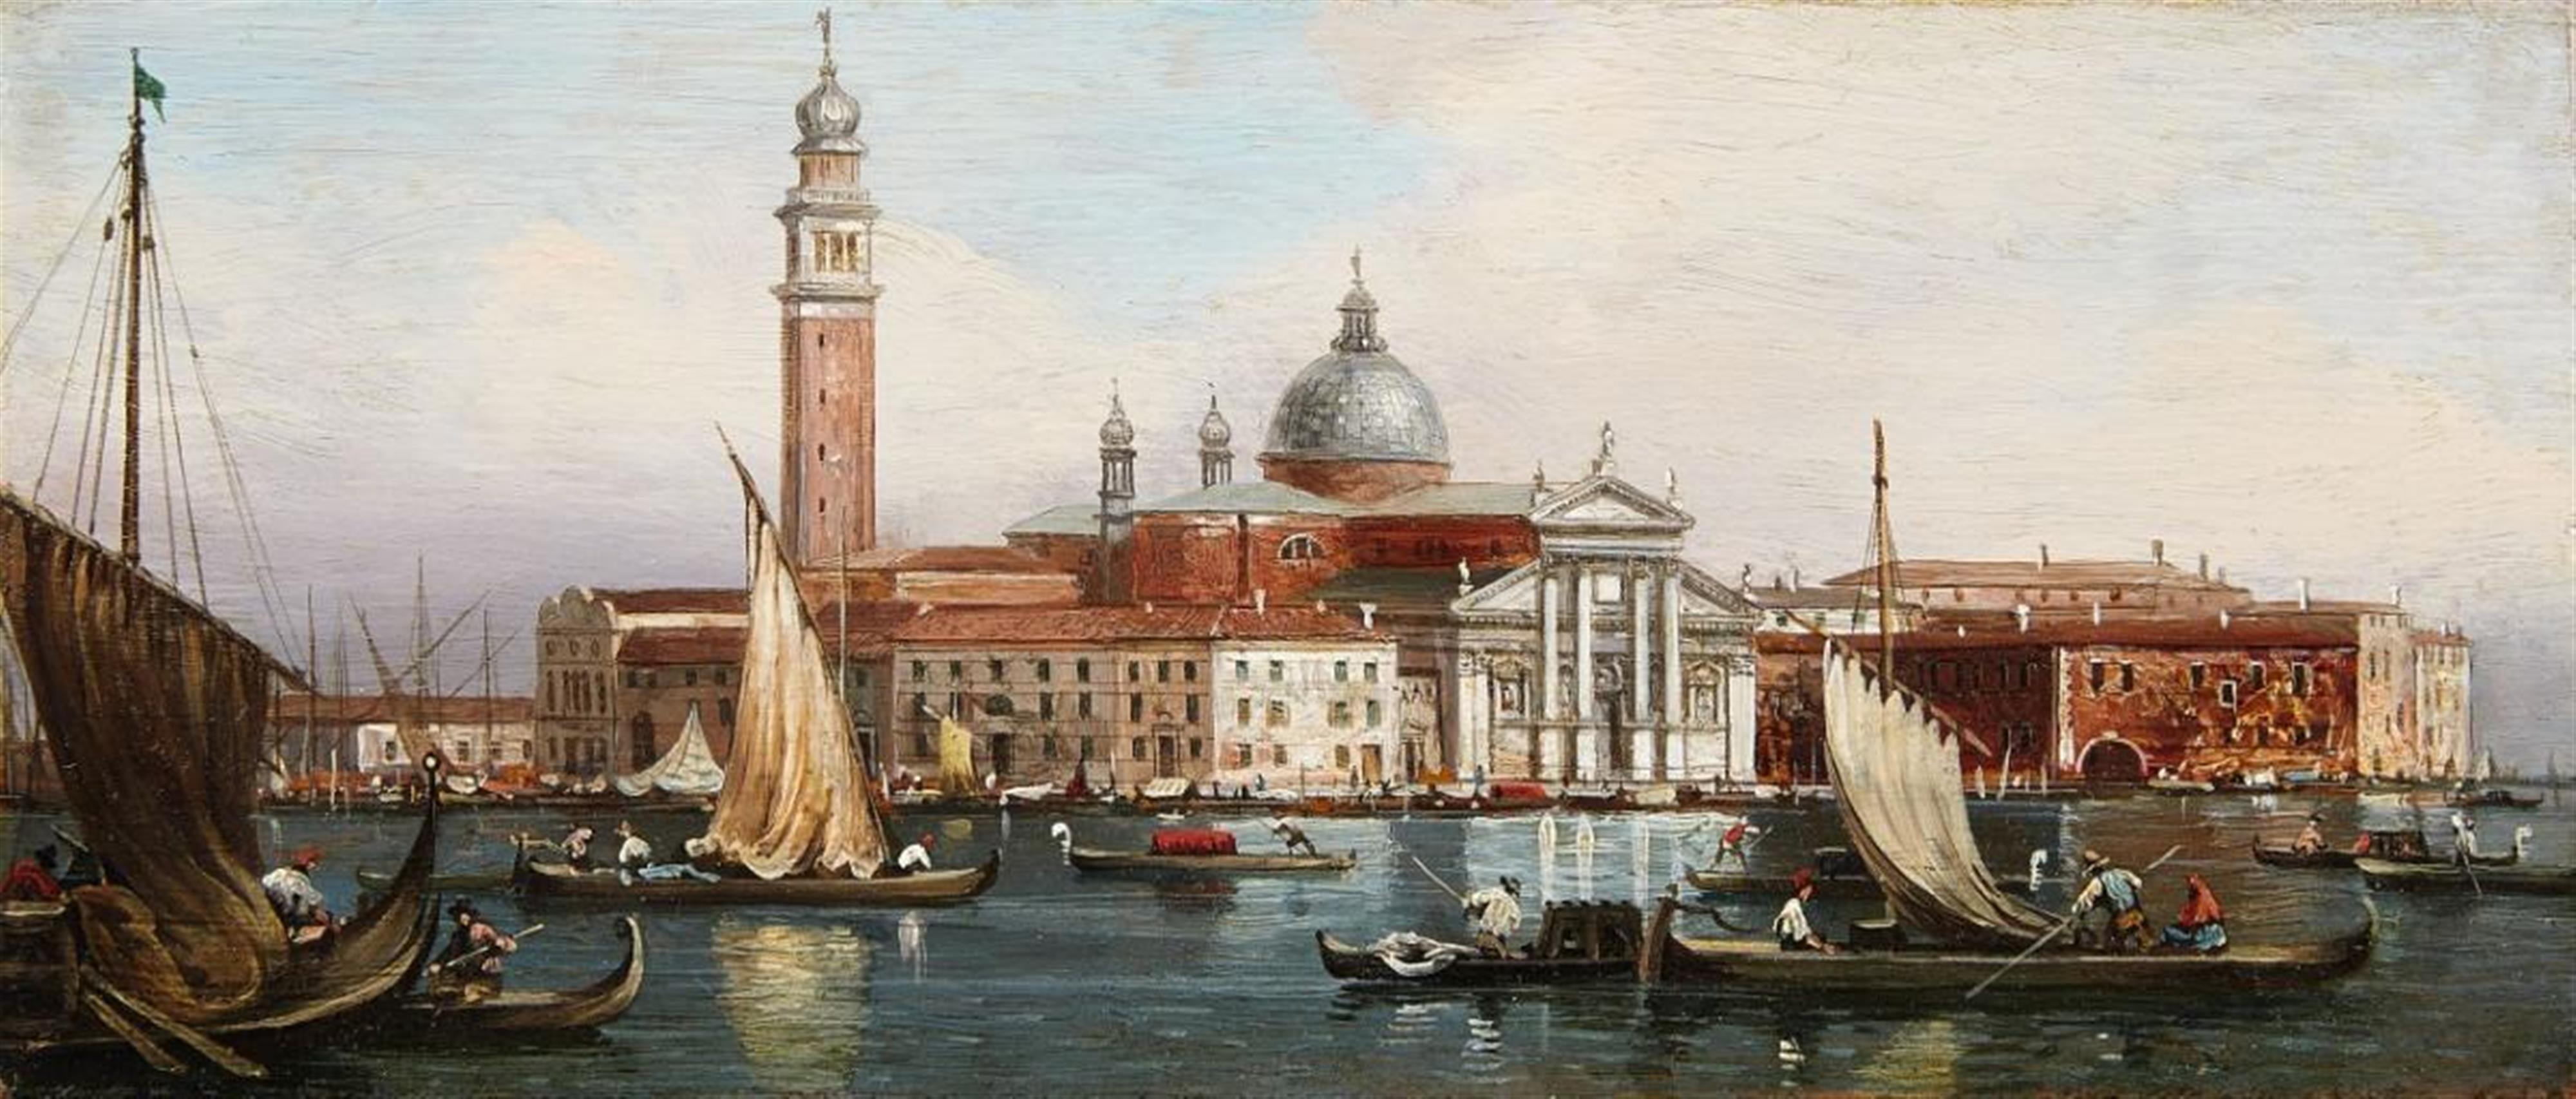 Antonio Canal, called Canaletto, successor - View of the Doge's Palace and Piazzeta from the Lagoon View of San Giorgio Maggiore from the Lagoon - image-2